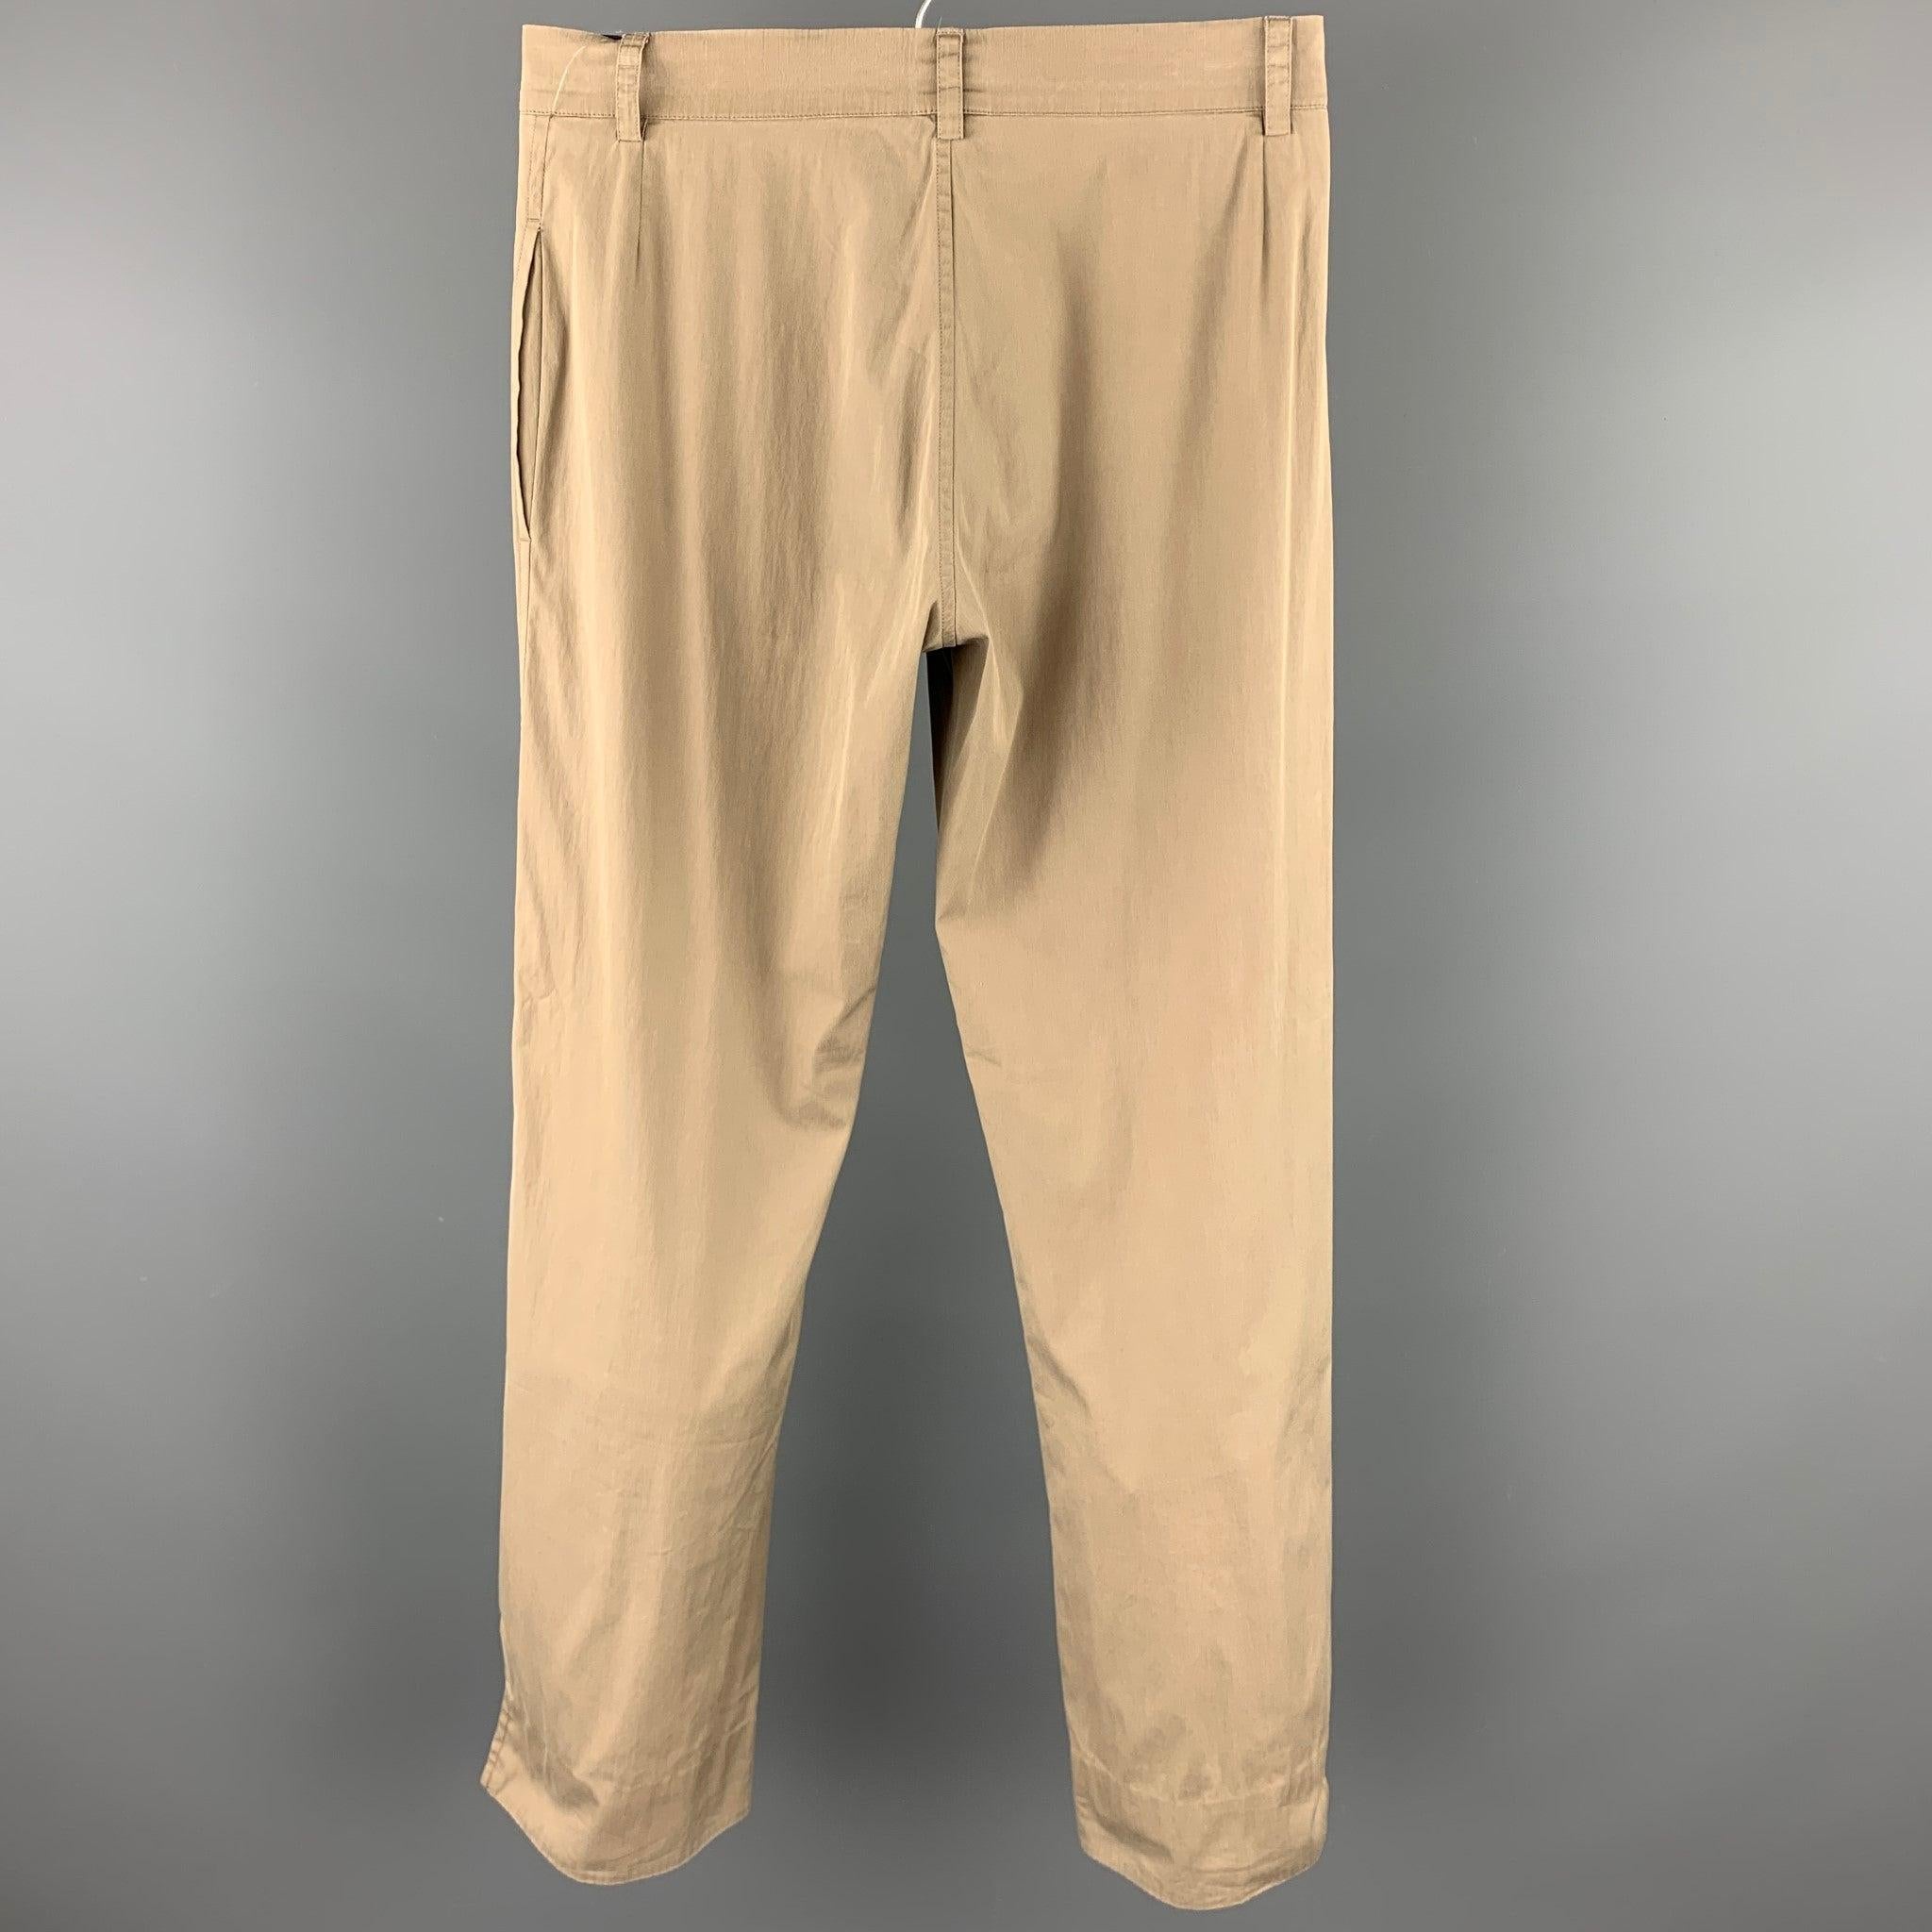 JIL SANDER dress pants comes in a taupe cotton featuring a straight leg and a zip fly closure. Made in Italy.
 Very Good
 Pre-Owned Condition. 
 

 Marked:  32 
 

 Measurements: 
  Waist: 28 inches 
 Rise: 9 inches 
 Inseam: 29 inches 
  
  
  
